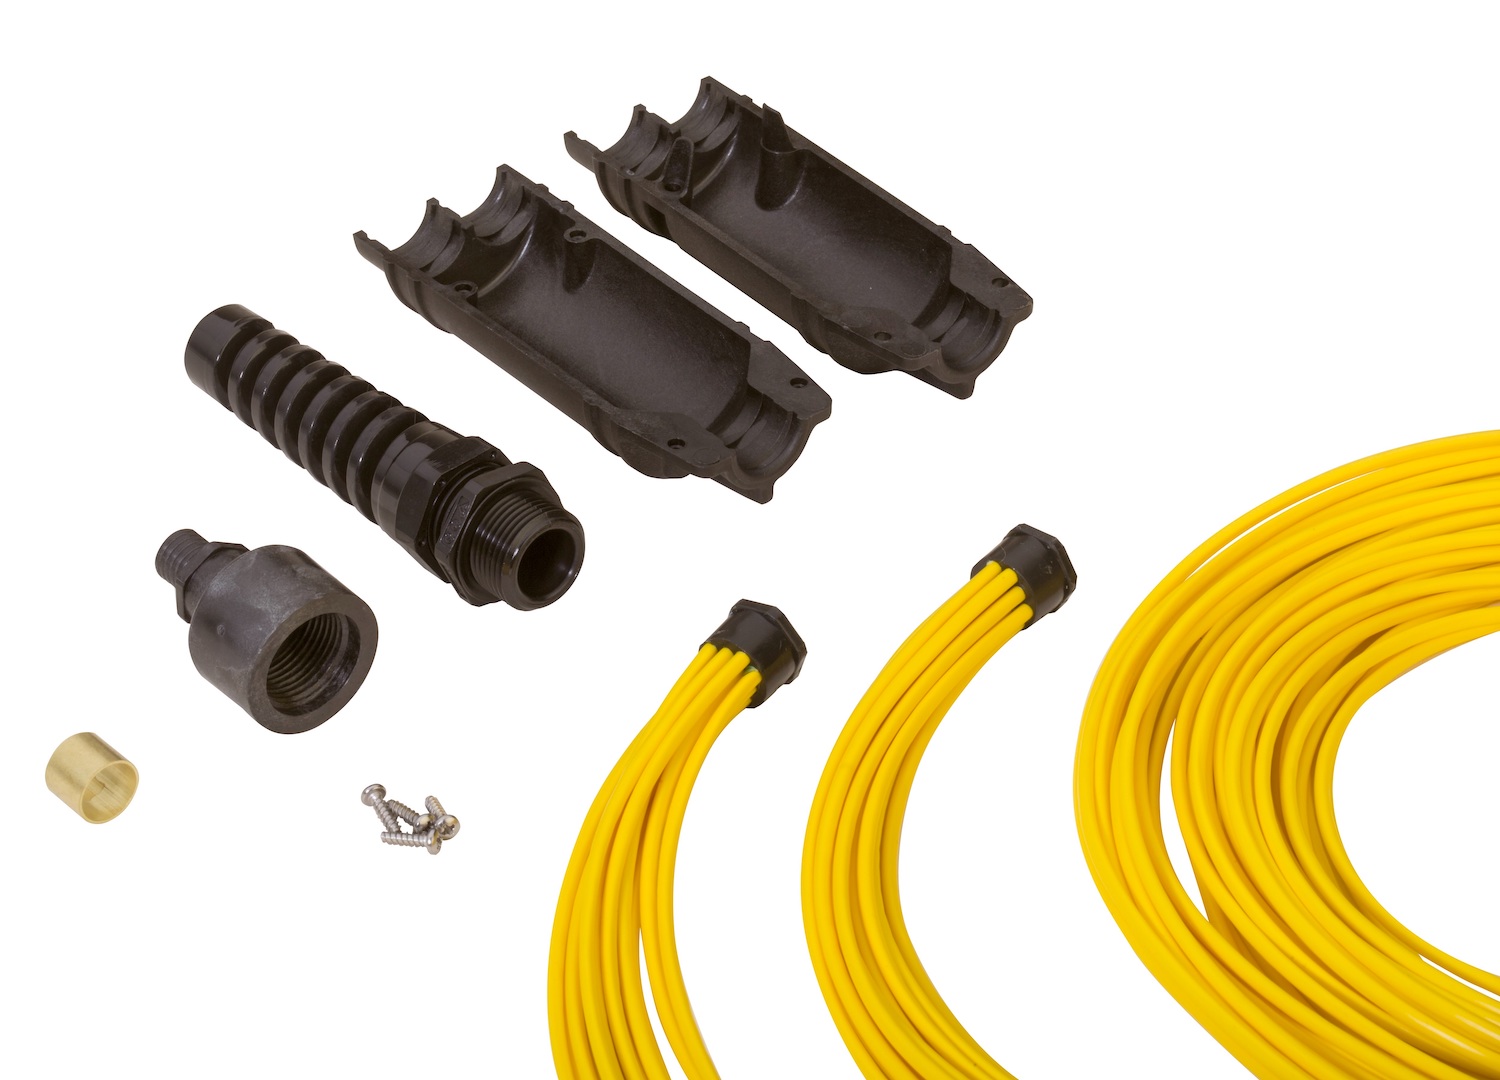 New Connector and Cable Products: April 2019 - Optical Cable Corporation’s (OCC’s) new customizable Forge Fan-Out Kits 